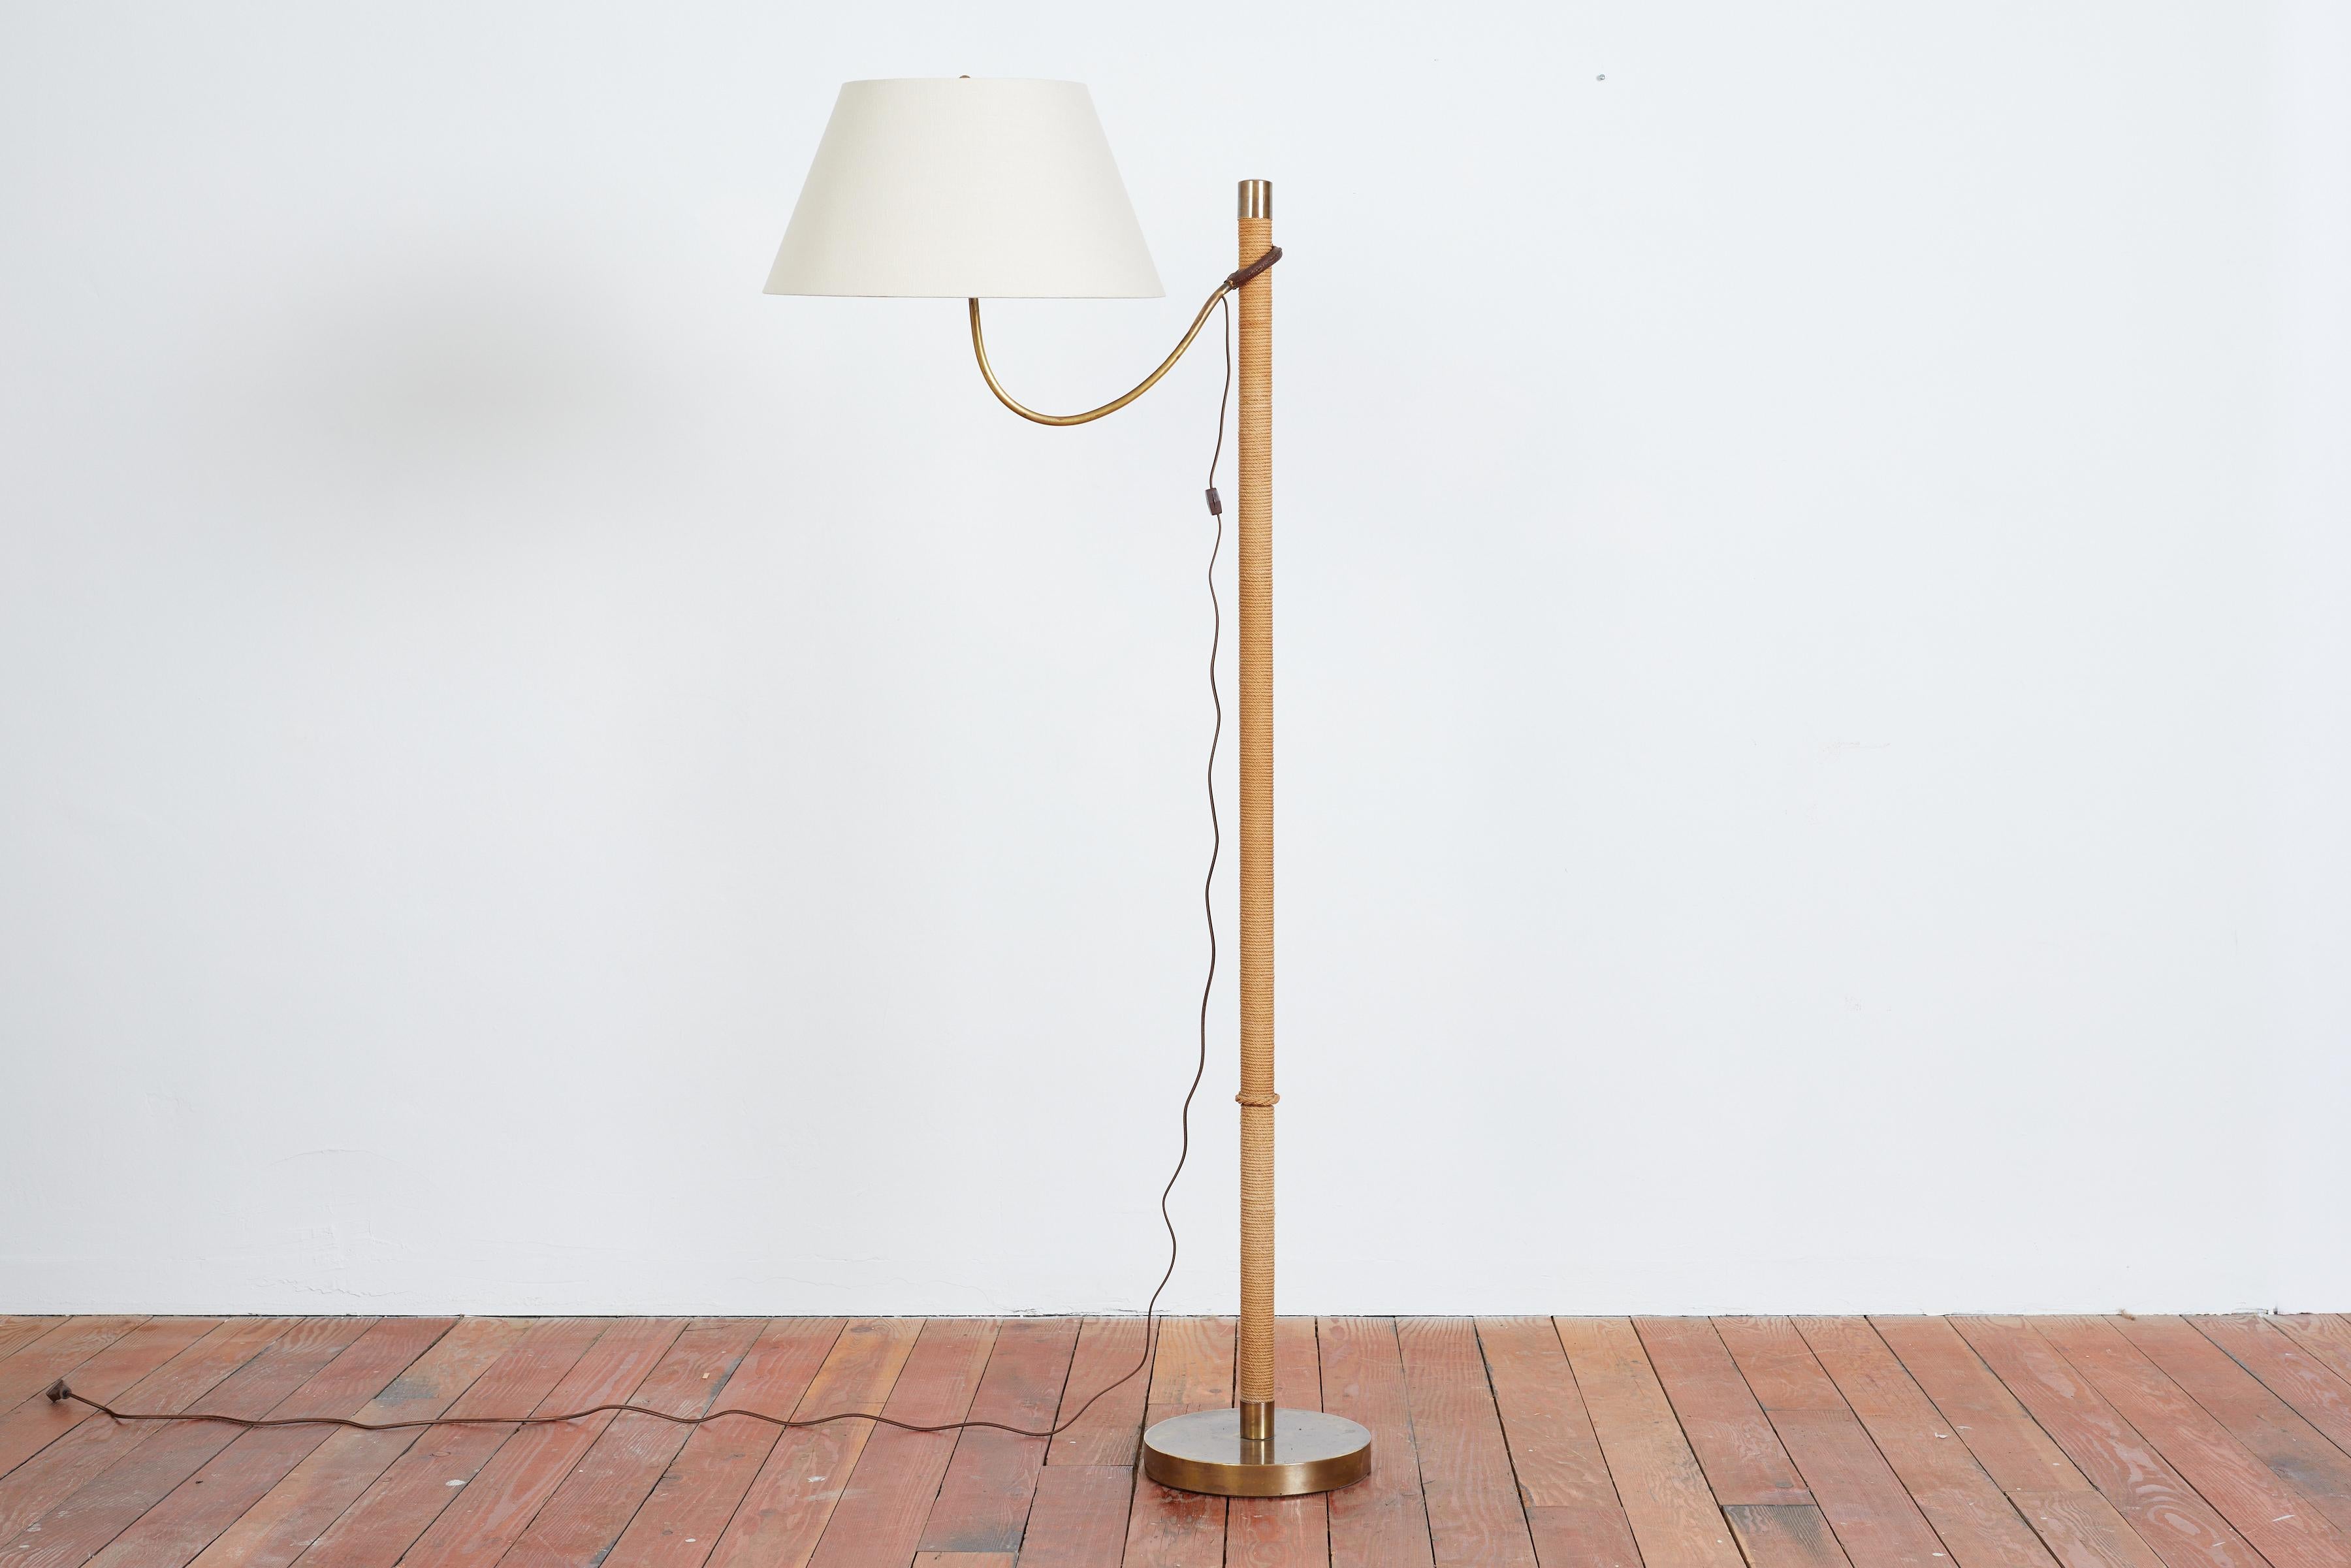 Incredible Italian floor lamp - Italy, 1950s 
Woven rope base with adjustable brass arm and original brown leather mechanism that keeps arm in place. 
New silk shade - 
